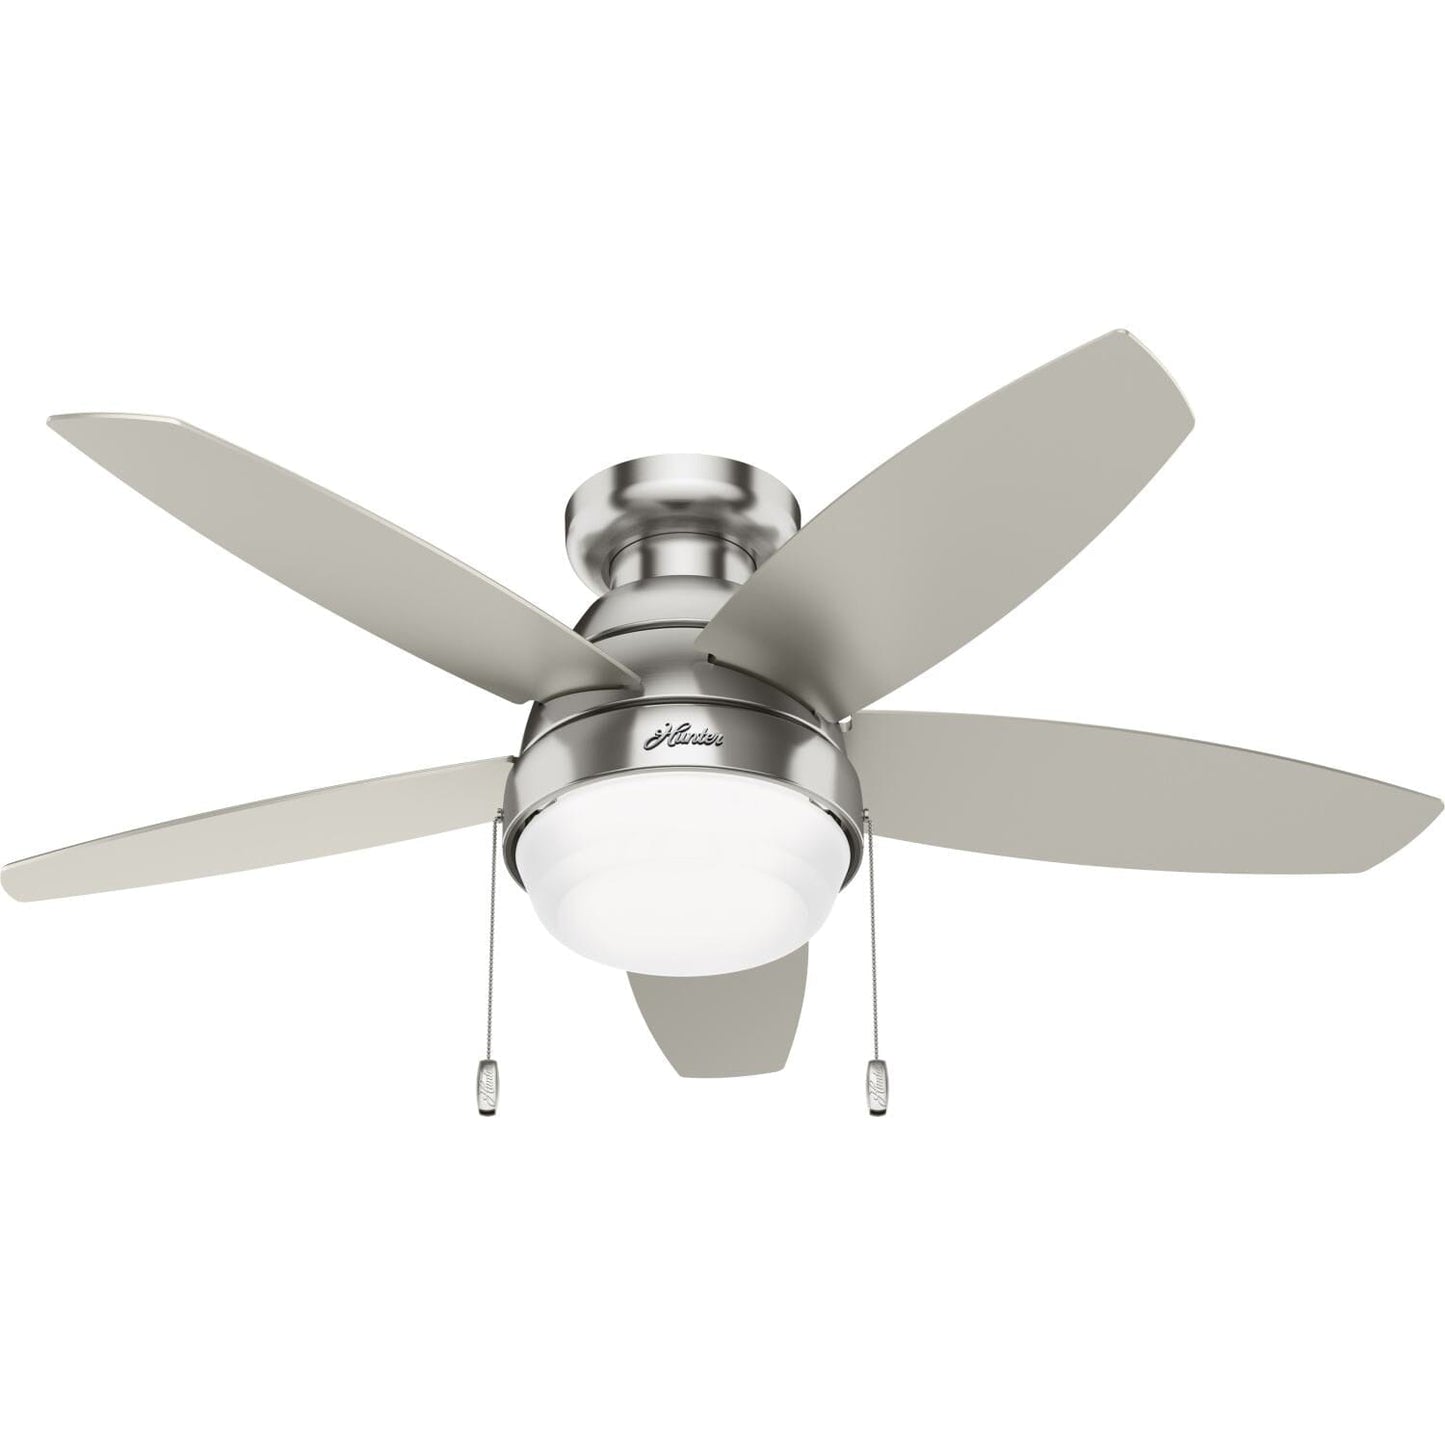 Lilliana with LED Light 44 inch Ceiling Fans Hunter Brushed Nickel - Matte Nickel 